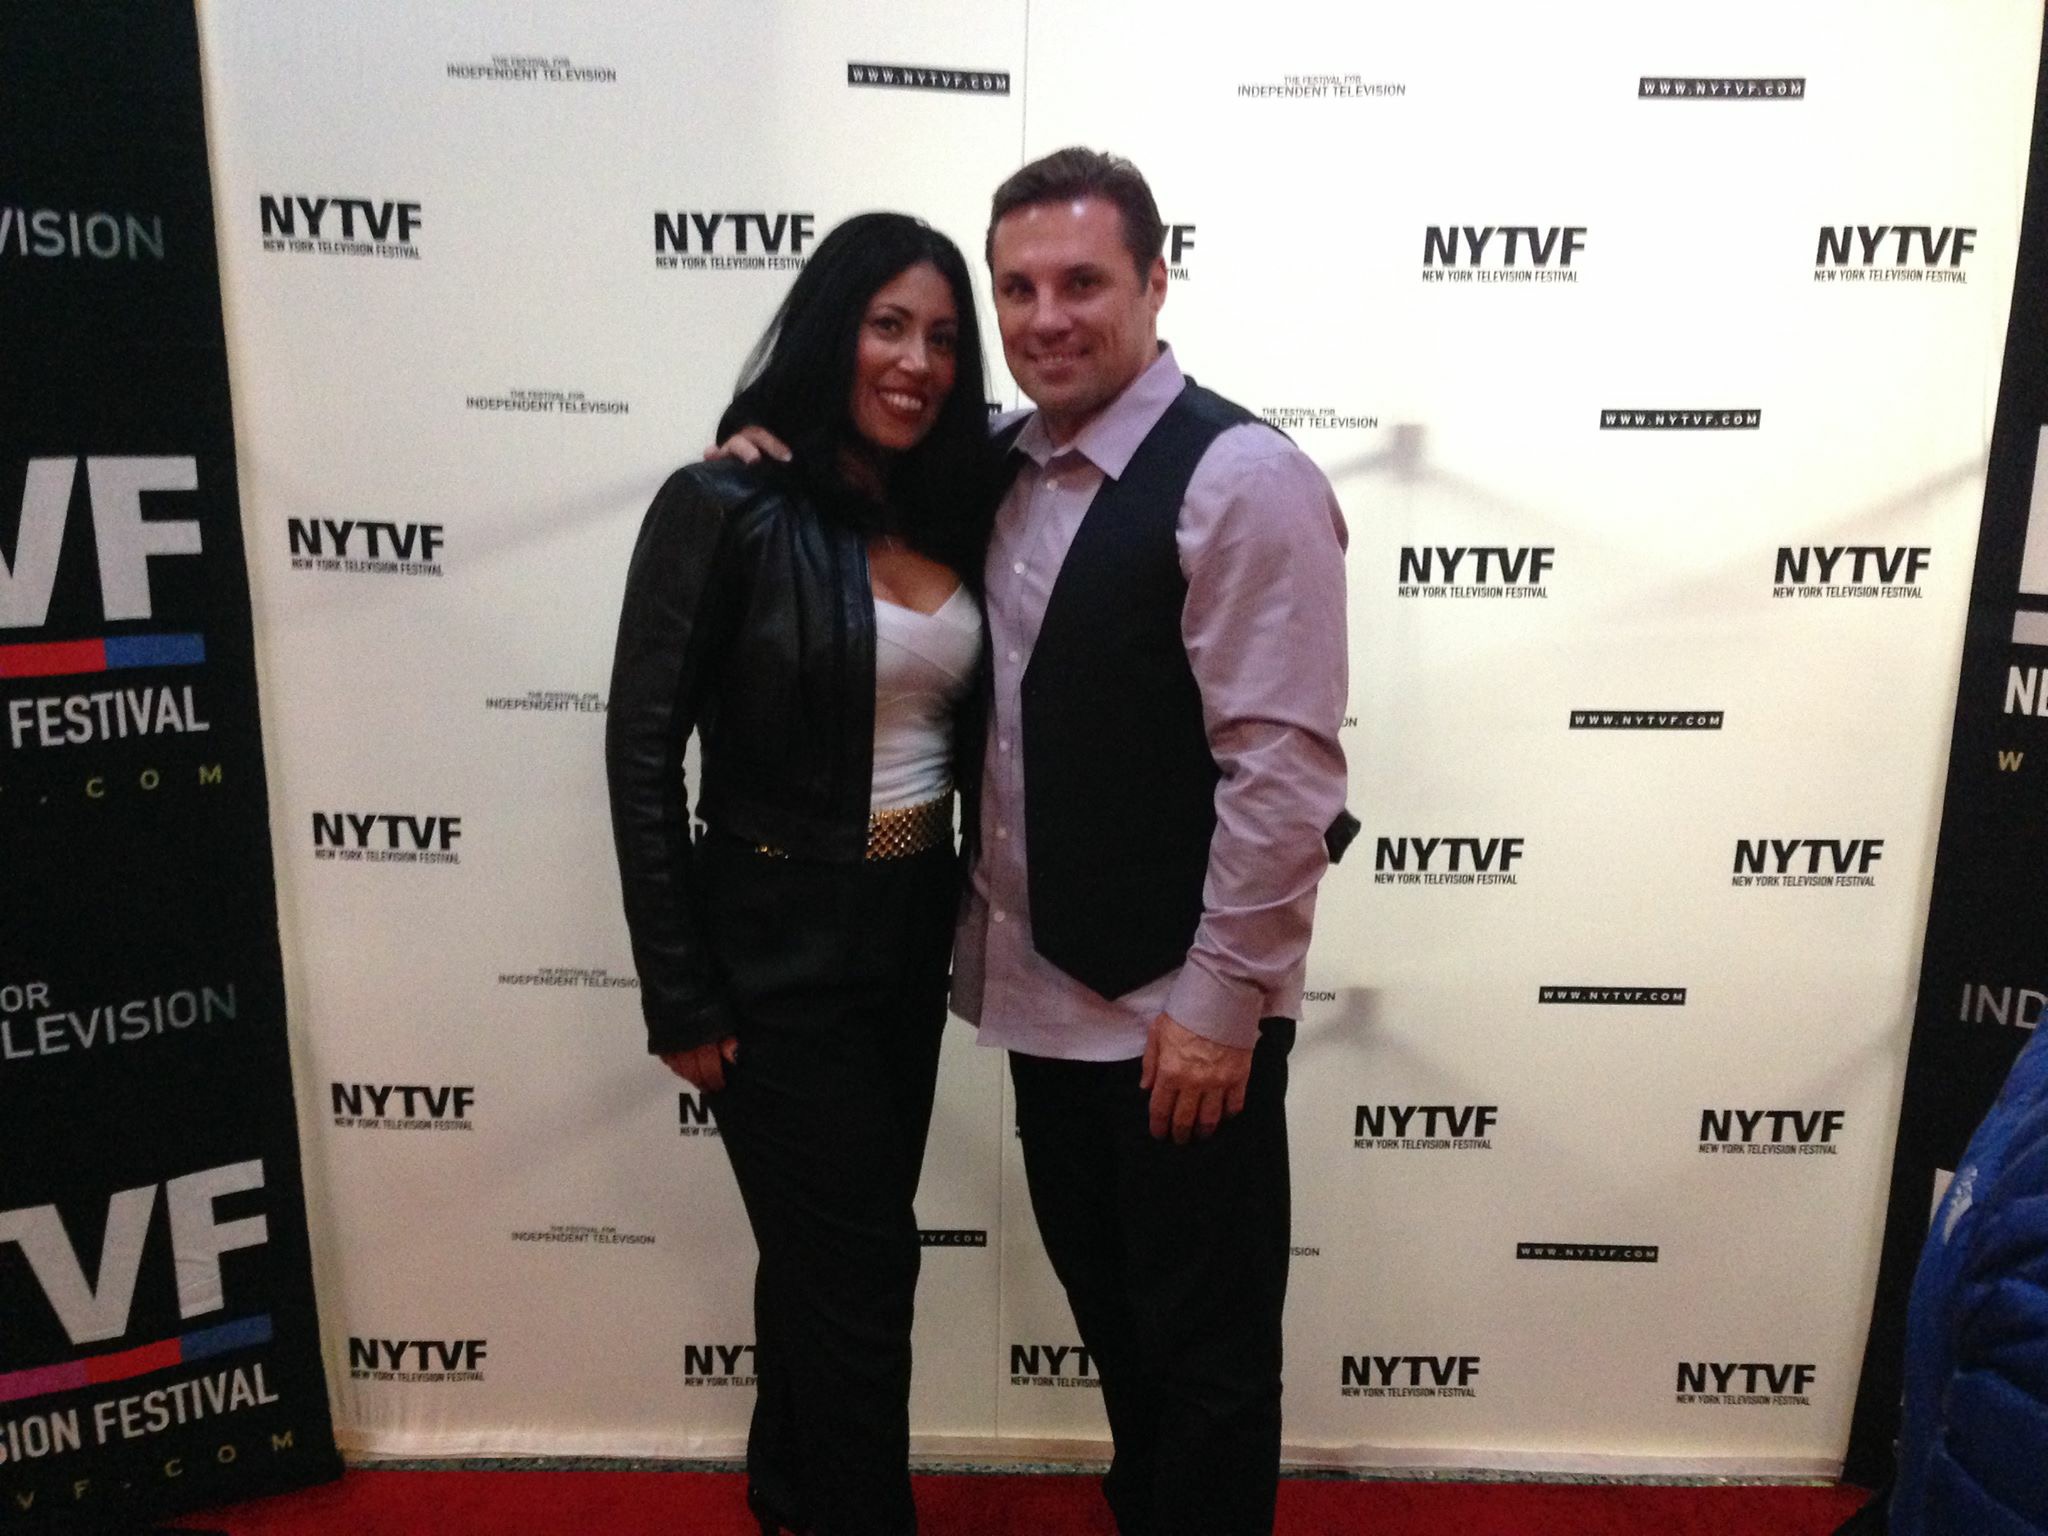 Christopher Stadulis at New York Television Festival